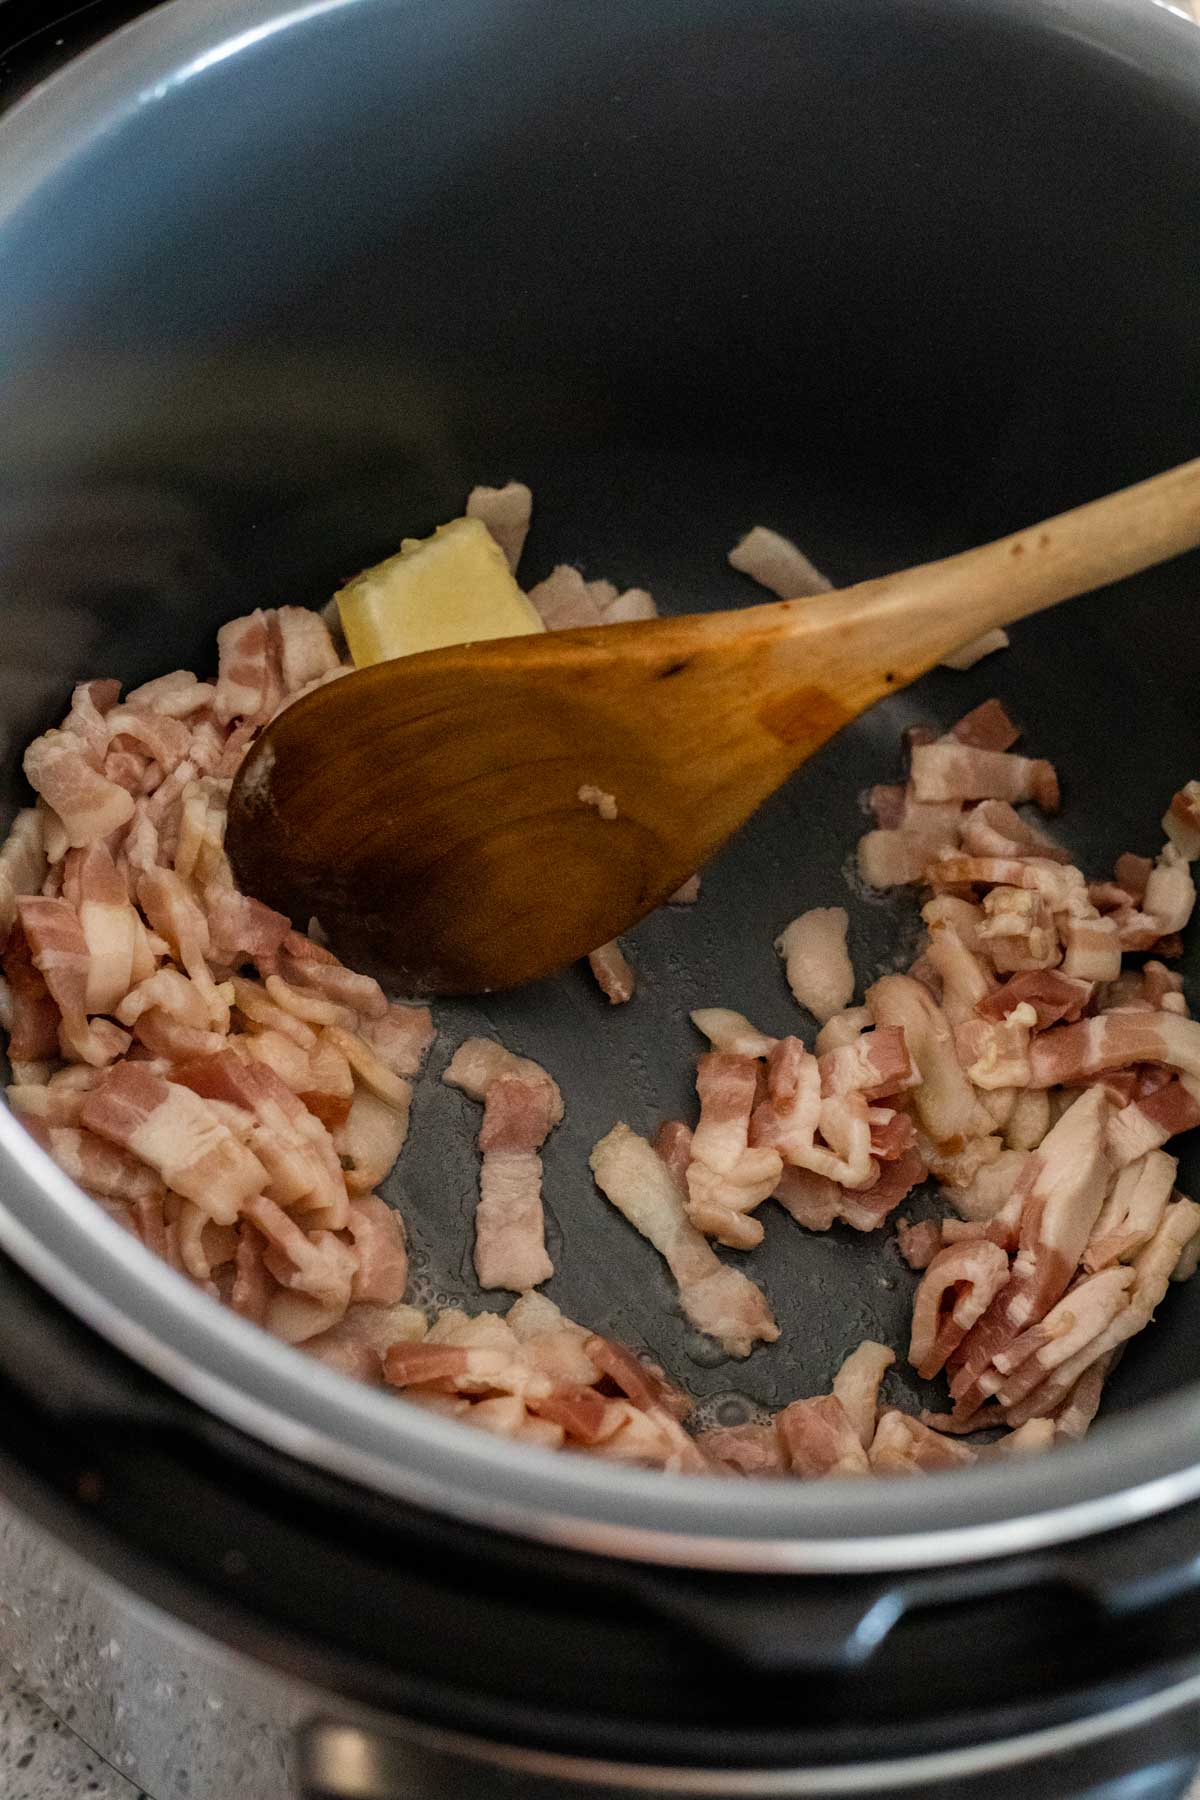 Bacon with butter being stirred around in the Instant Pot insert with a wooden spoon.